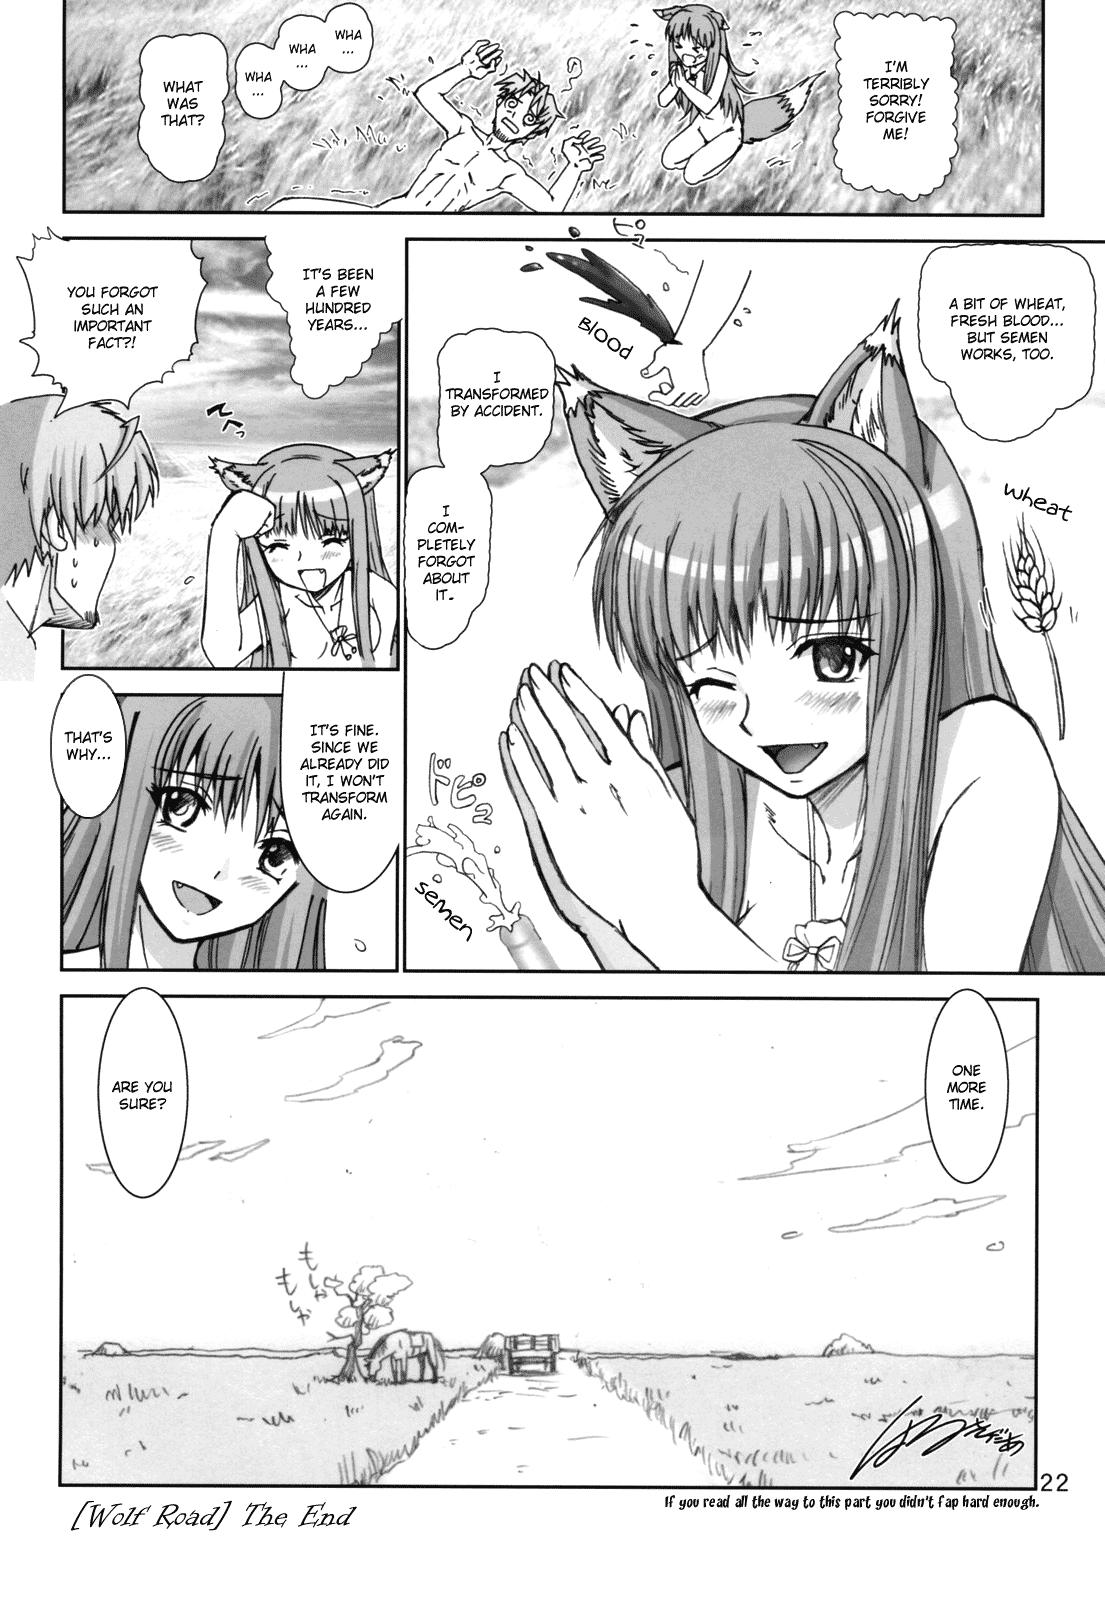 Infiel Wolf Road - Spice and wolf Gay Cumjerkingoff - Page 20